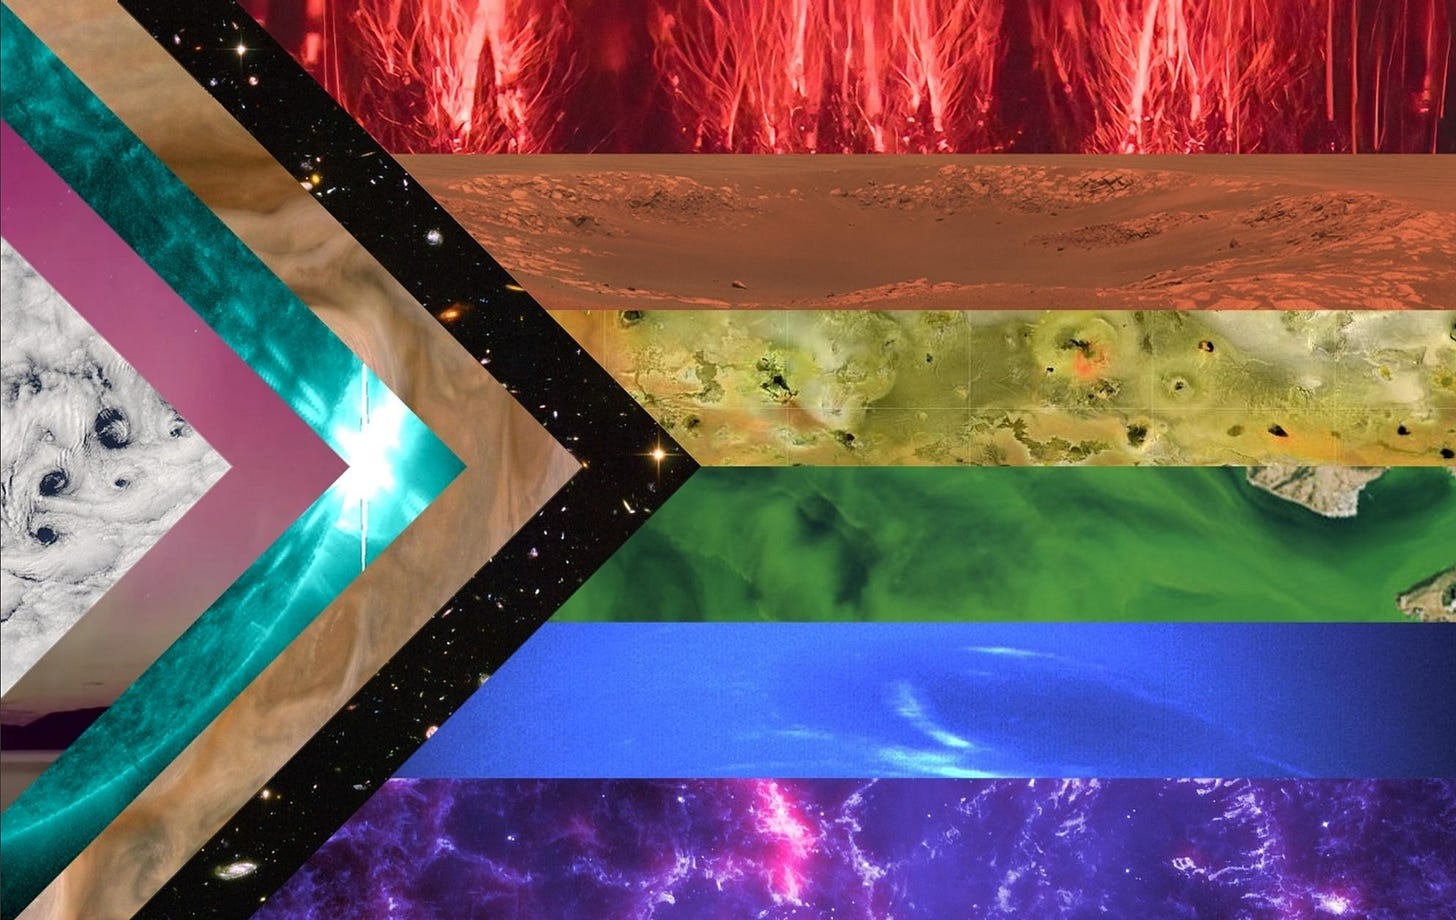 A pride flag with every color band represented by a NASA image. White is Earth clouds, pink is aurora, blue is the Sun in a specific wavelength, brown is Jupiter clouds, black is the Hubble deep field, red is the top of sprites, orange is a Mars crater, yellow is the surface of Io, green is a lake with algae, blue is Neptune, and purple is the Crab Nebula in a specific wavelength.